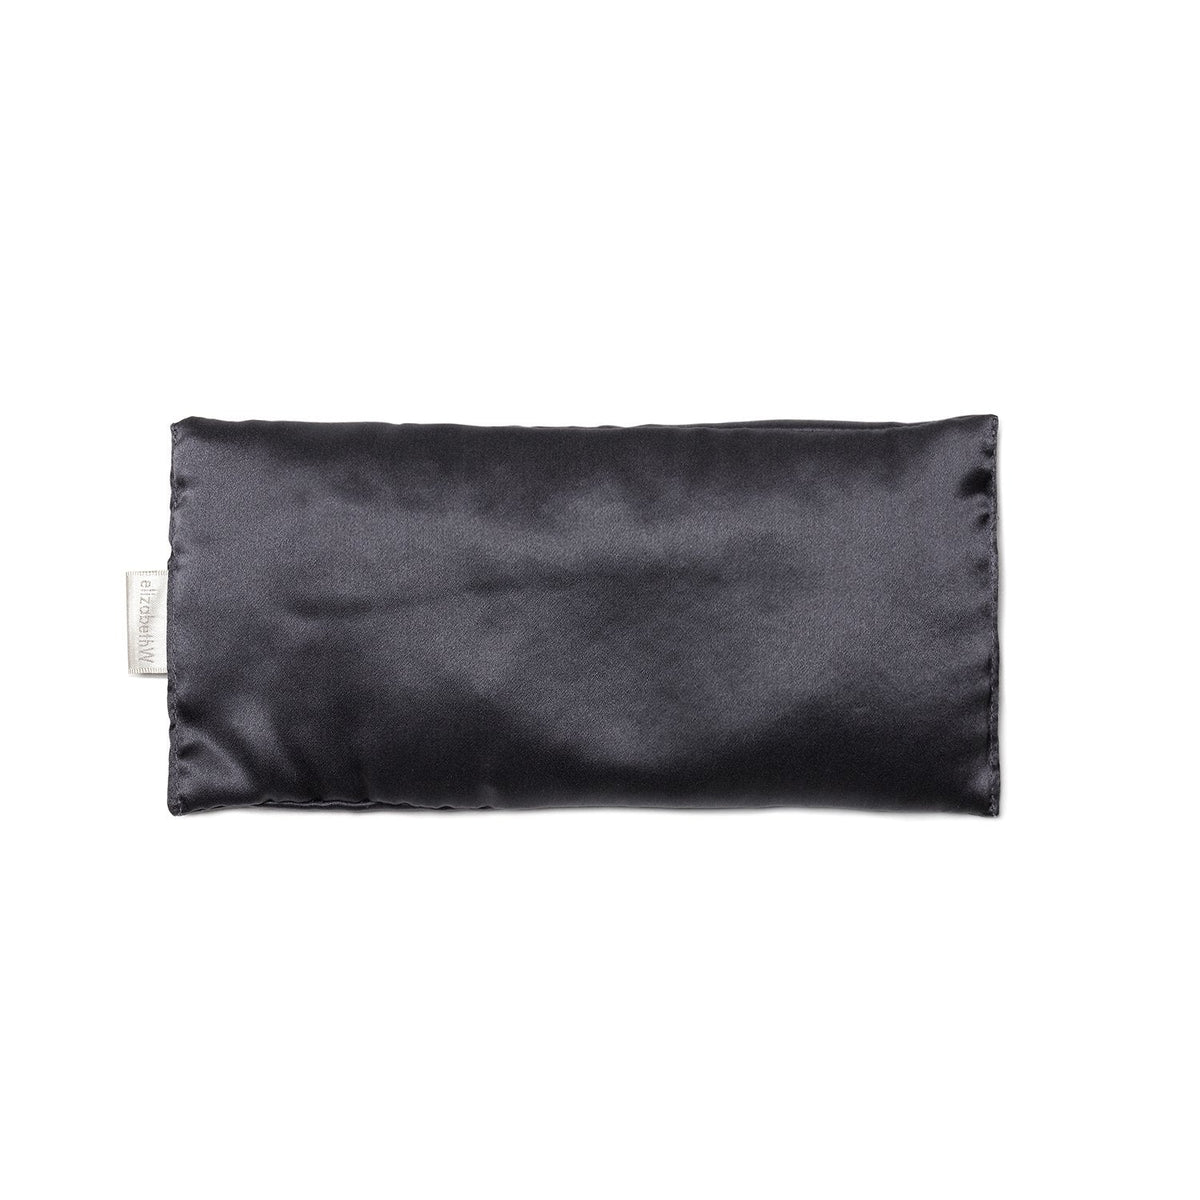 A Slate elizabeth W Silk Eye Pillow isolated on a white background, featuring a smooth and lustrous finish with lavender-filled stitching along the edges.